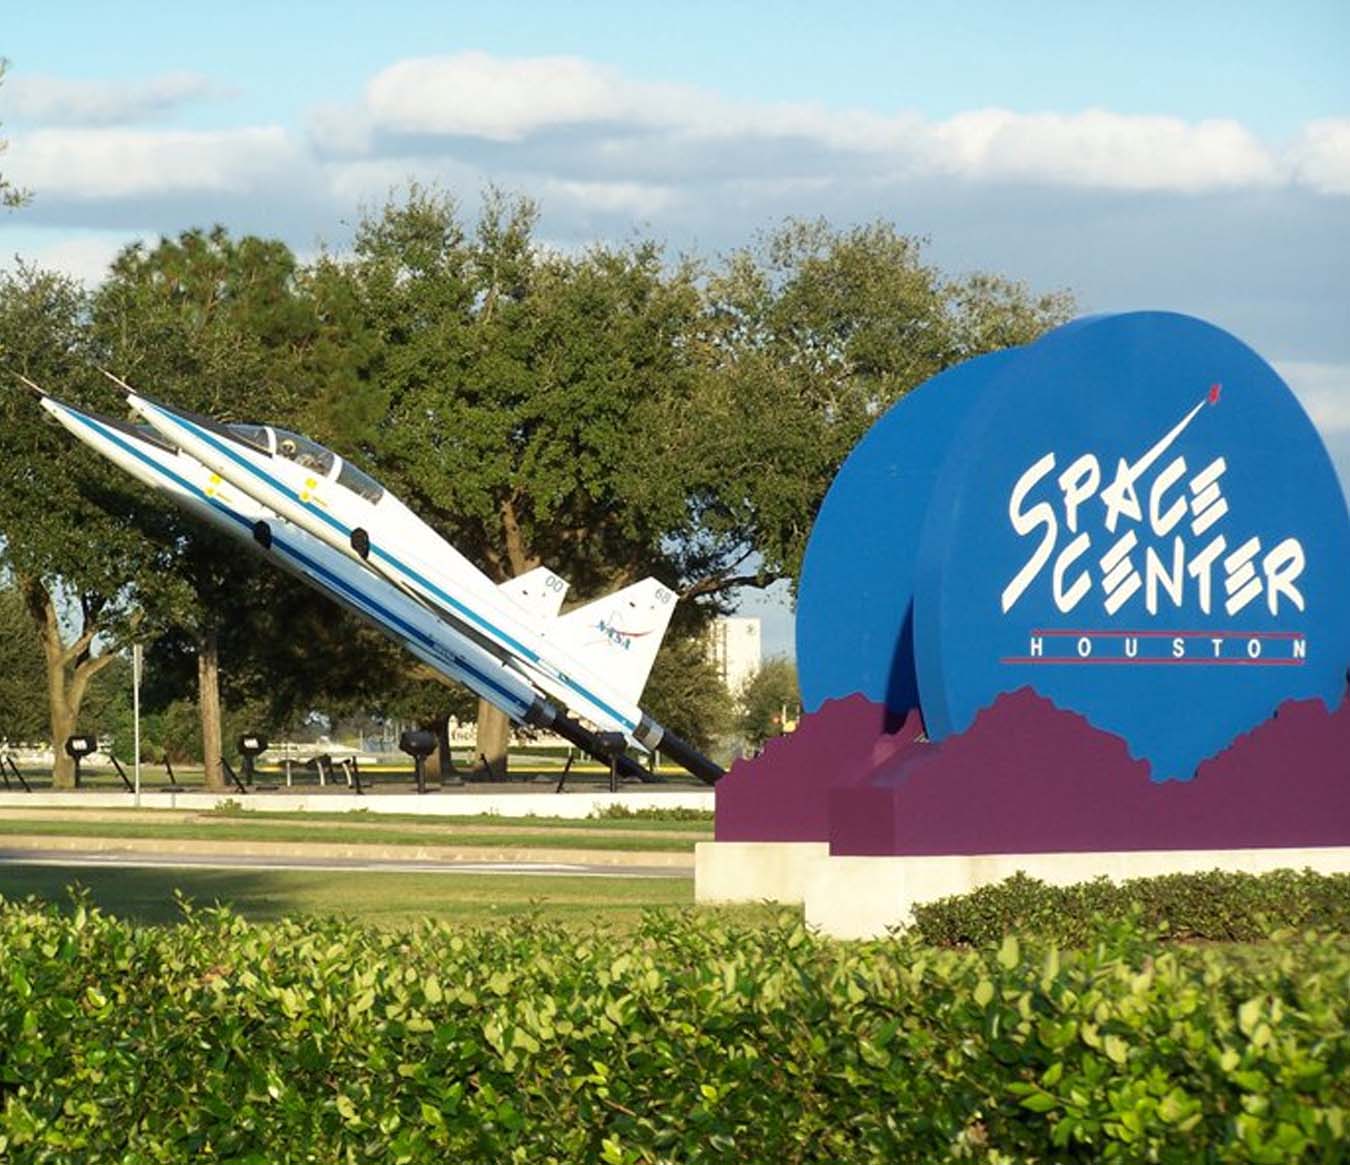 Things to Do in Houston - Space Center Houston